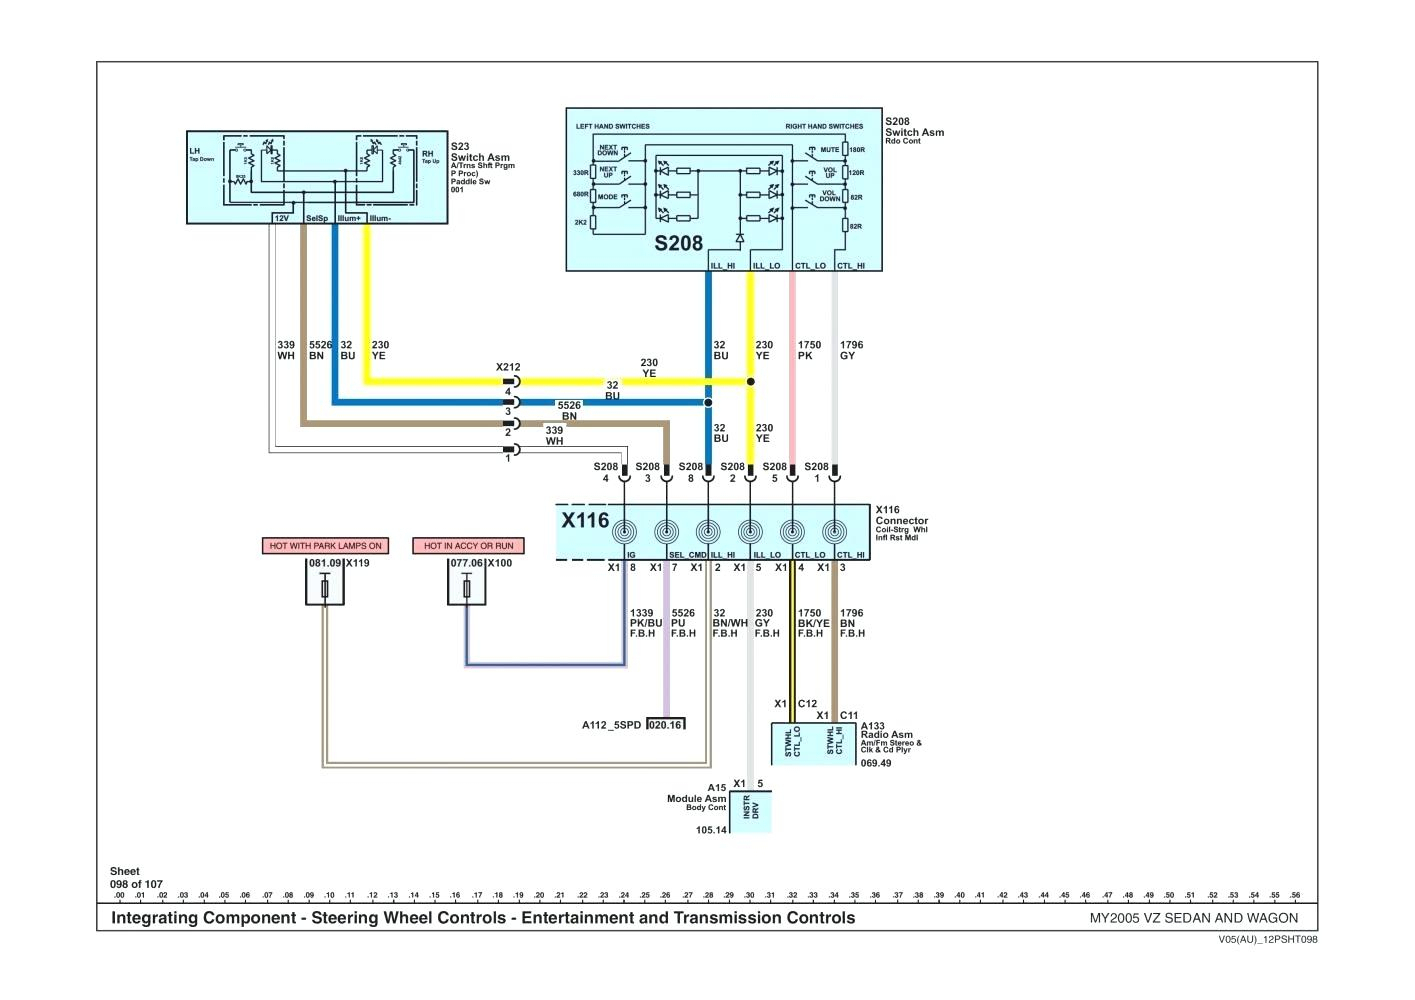 Home Stereo Wiring | Wiring Library - Home Speaker Wiring Diagram